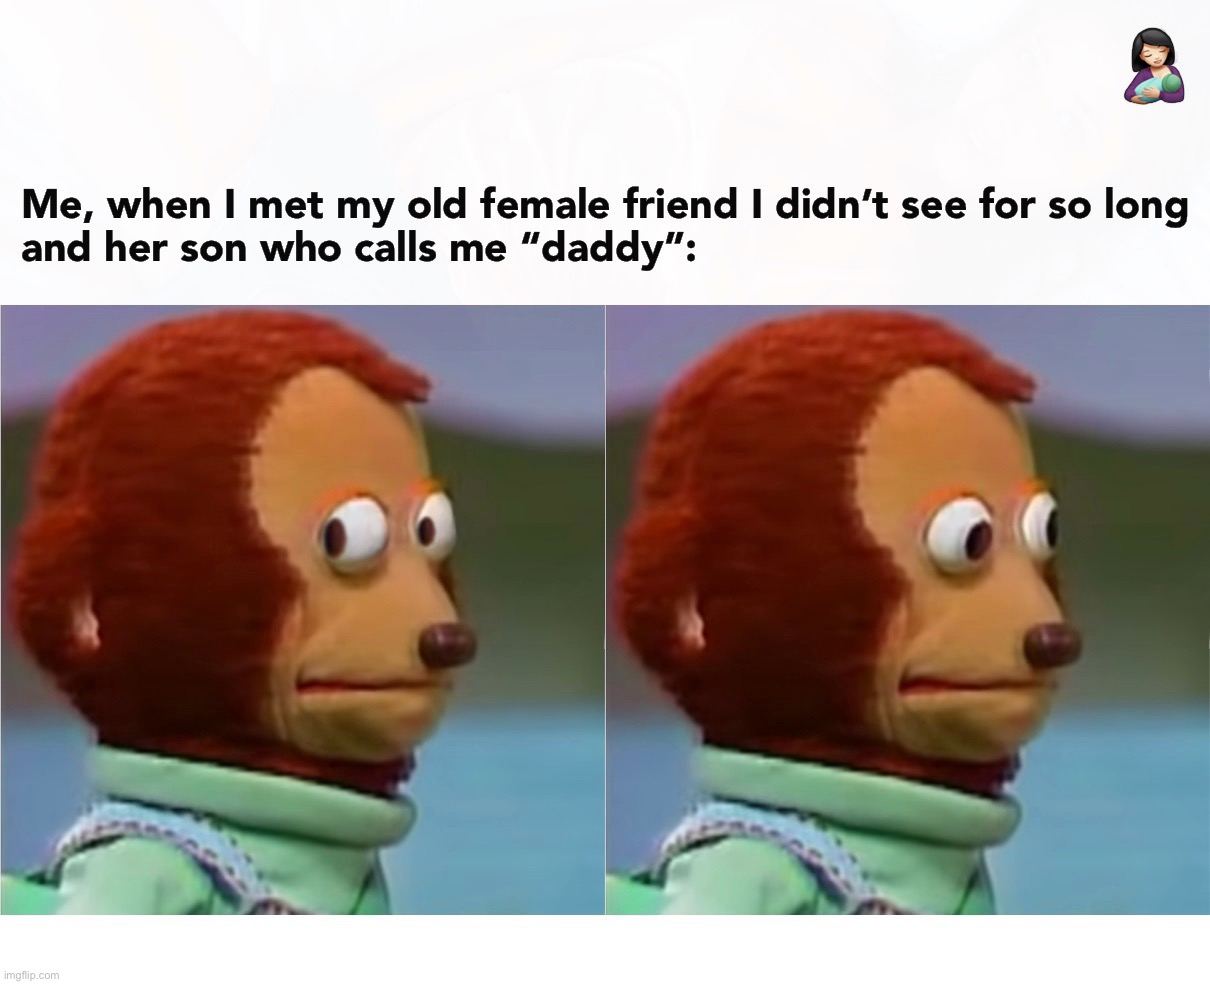 My old friend! | Me, when I met my old female friend 🤱🏻 I didn’t see for so long and her son who calls me “daddy”. 👨‍👩‍👦 | image tagged in my old friend,female friend,best friends,love and friendship,friendship ended,monkey puppet | made w/ Imgflip meme maker